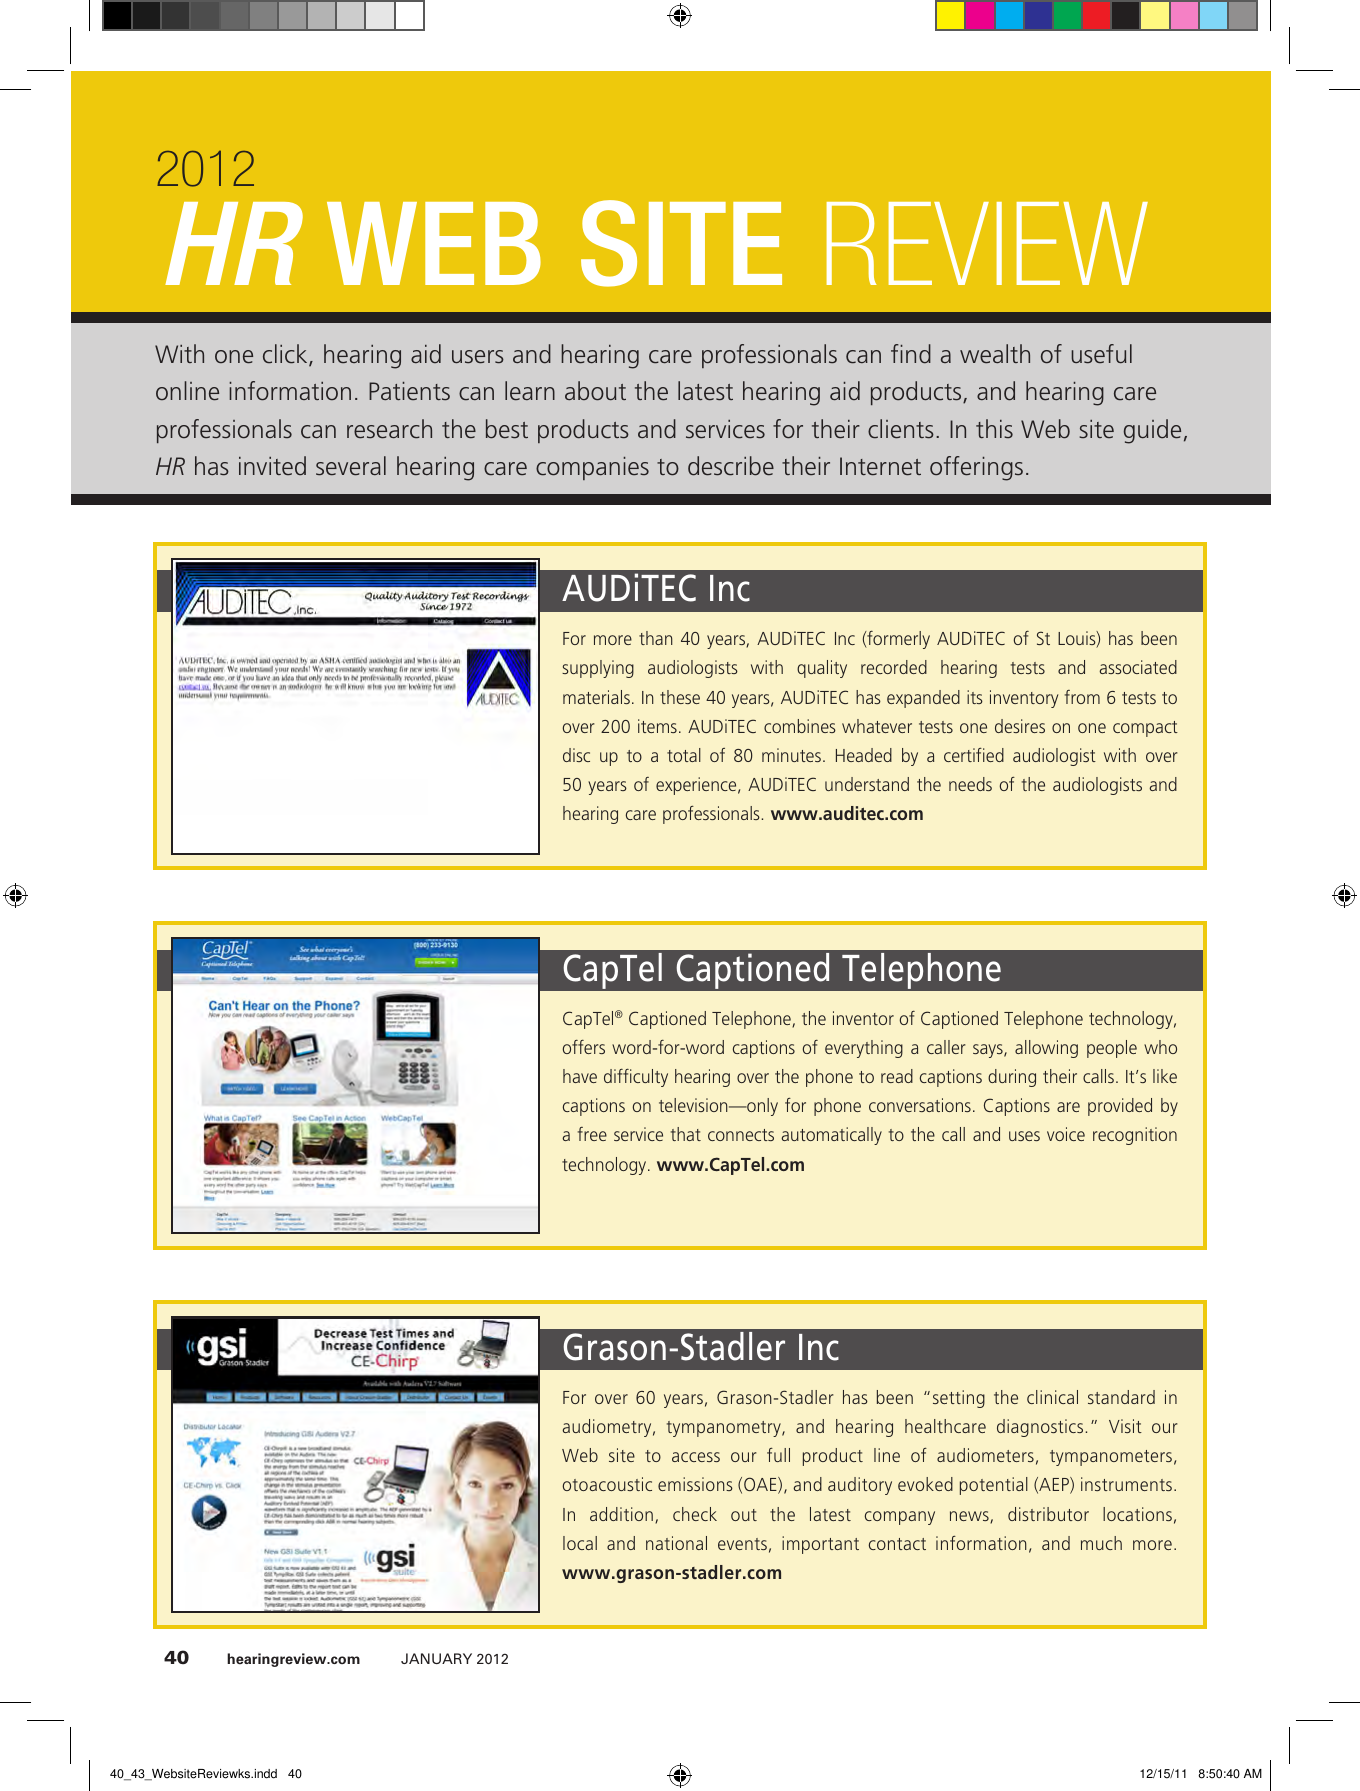 Page 1 of 4 - HR Website Review-2012